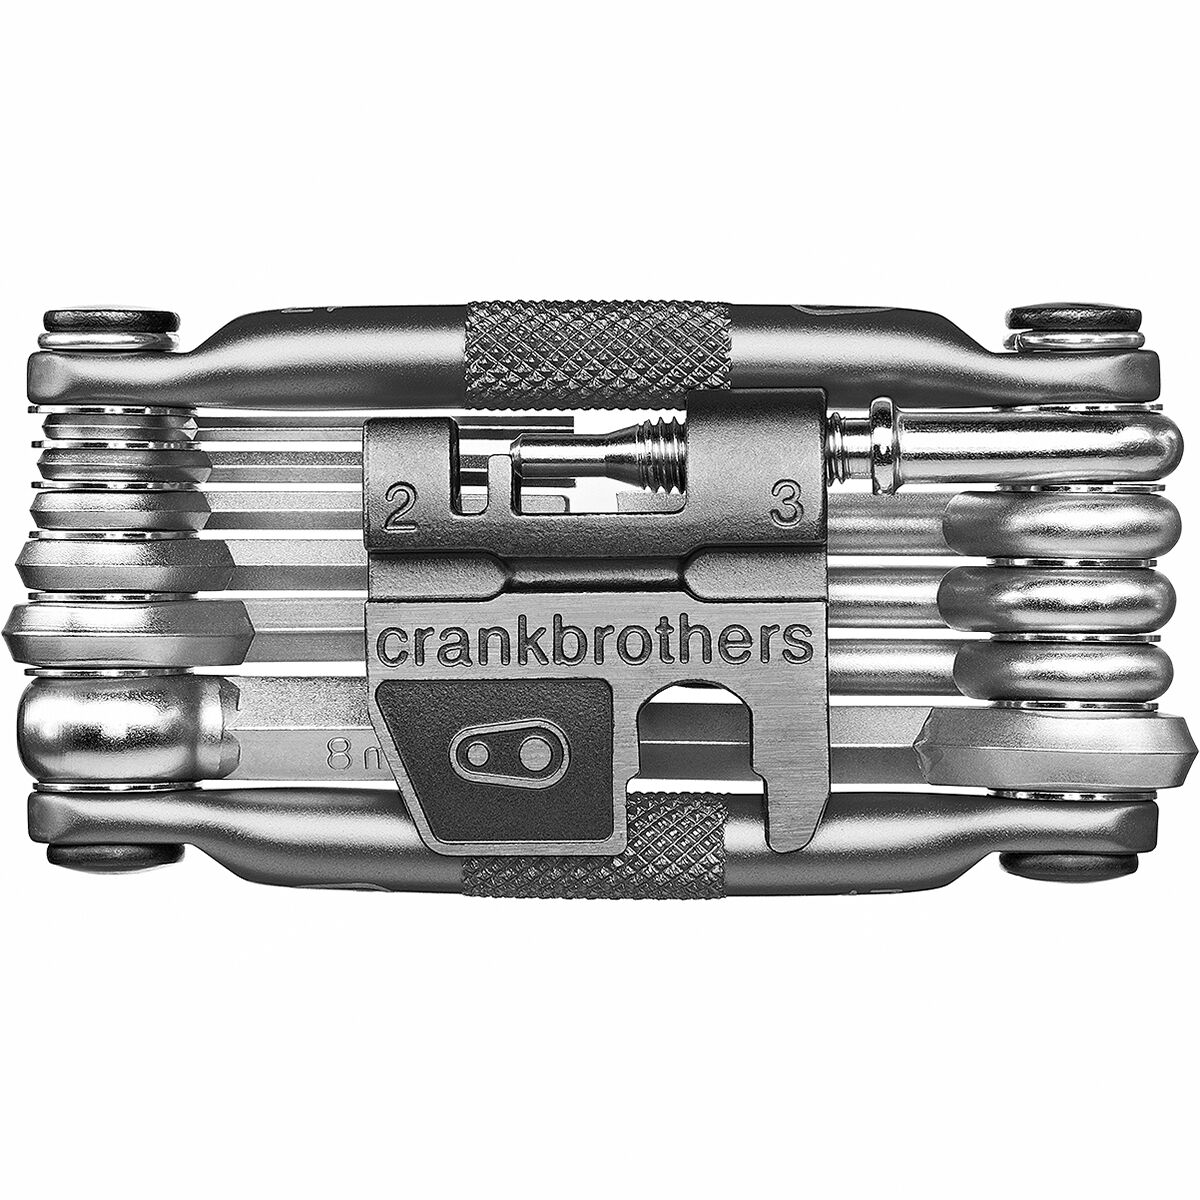 Crank Brothers Multi 17 Tool Nickel, One Size